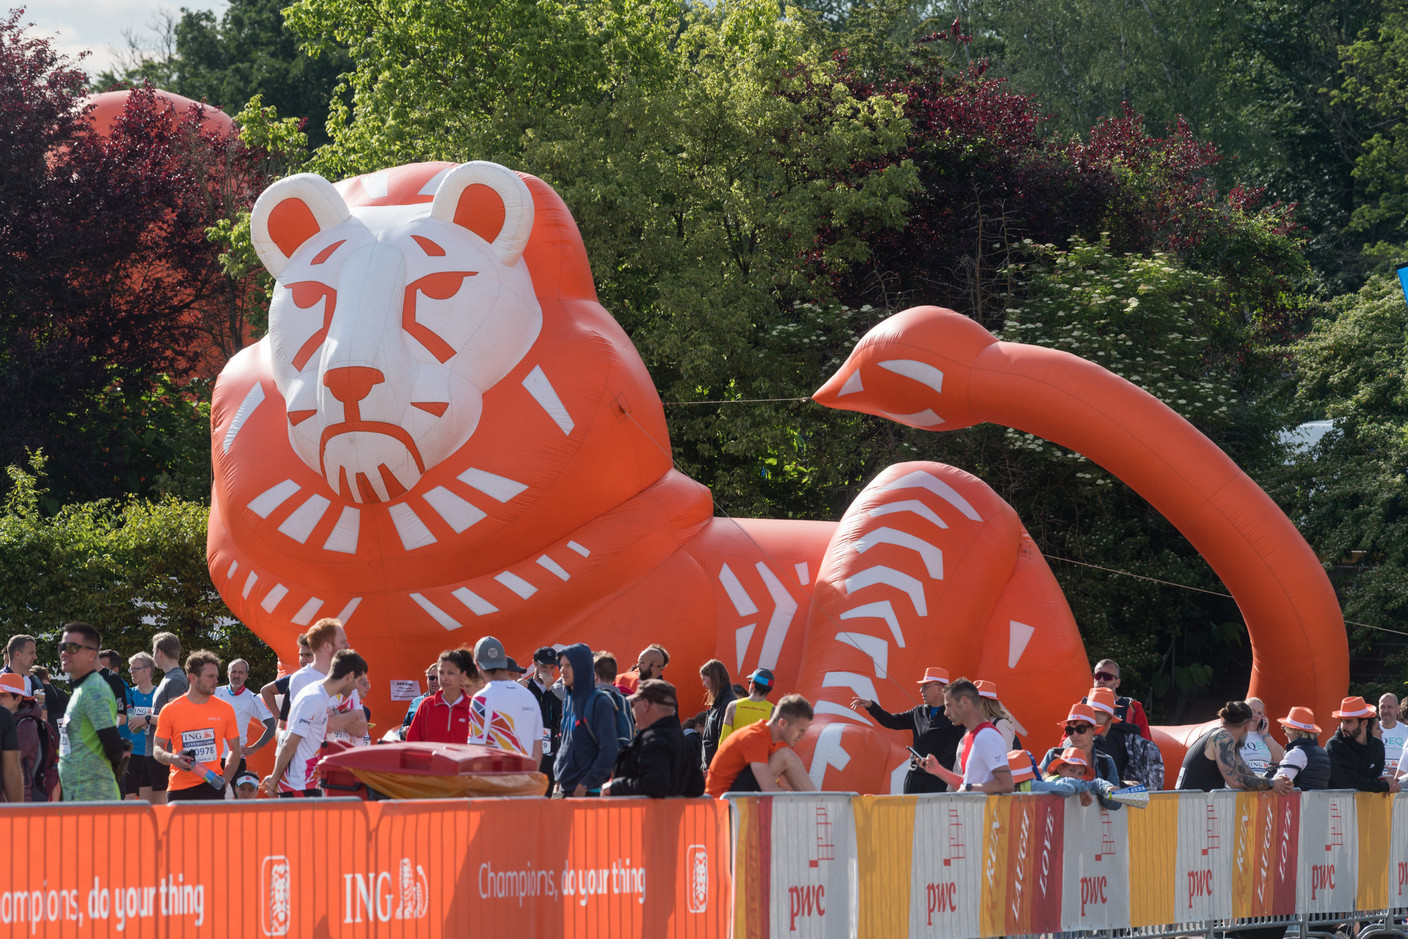 A total of 12,000 runners took part in the event according to ING’s website with an estimated 100,000 spectators cheering on the participants.  Nader Ghavami